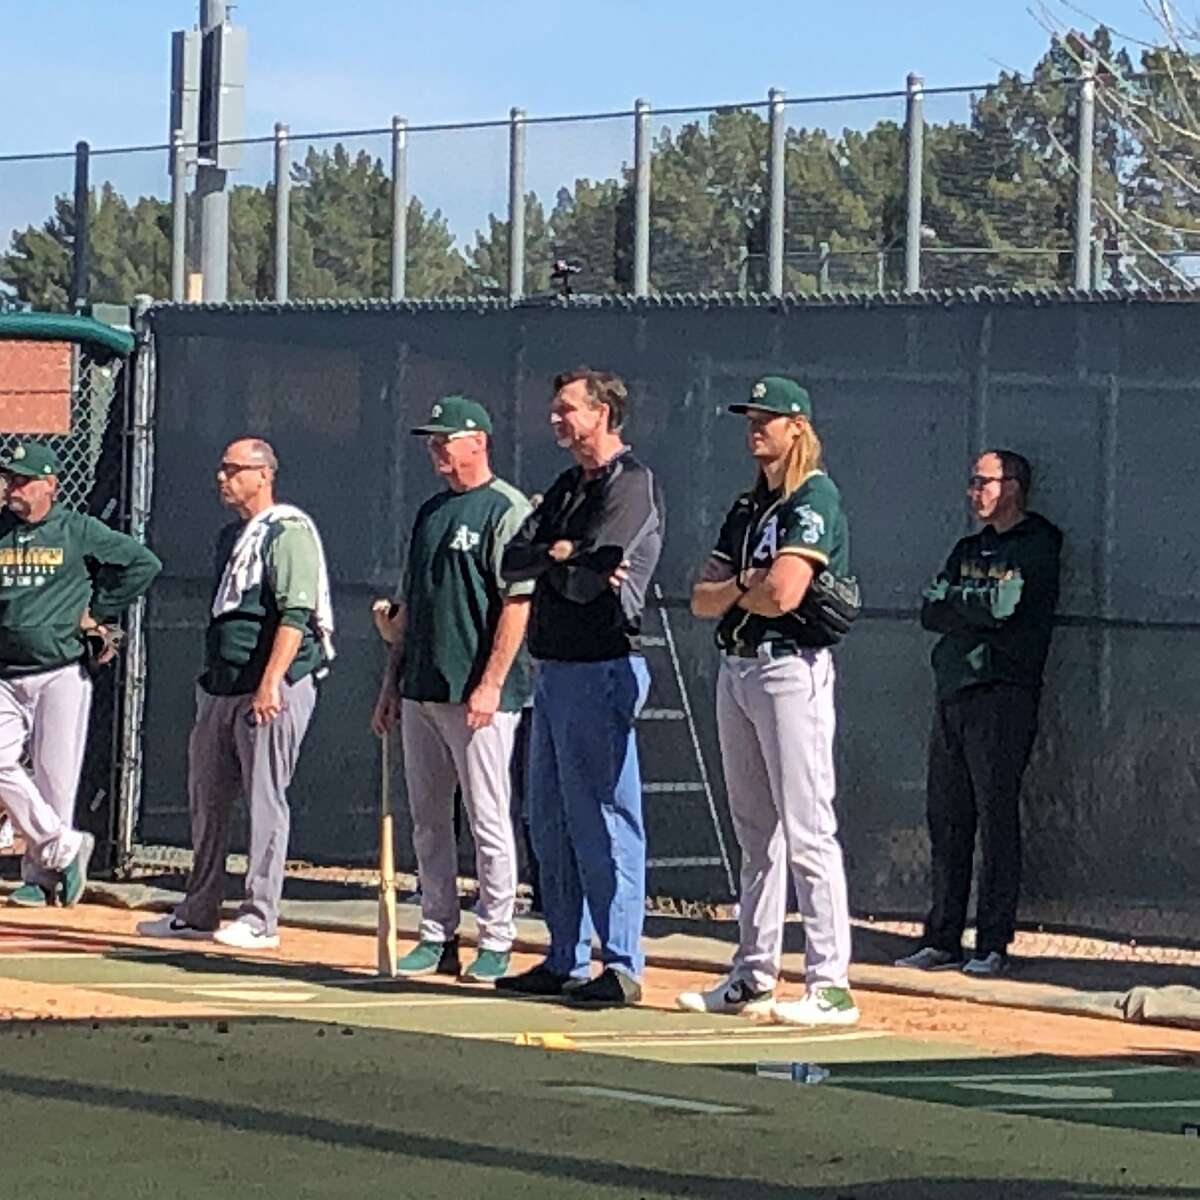 A's manager Bob Melvin, Hall of Famer Randy Johnson and Oakland starter A.J. Puk chatted during Sunday's workout.